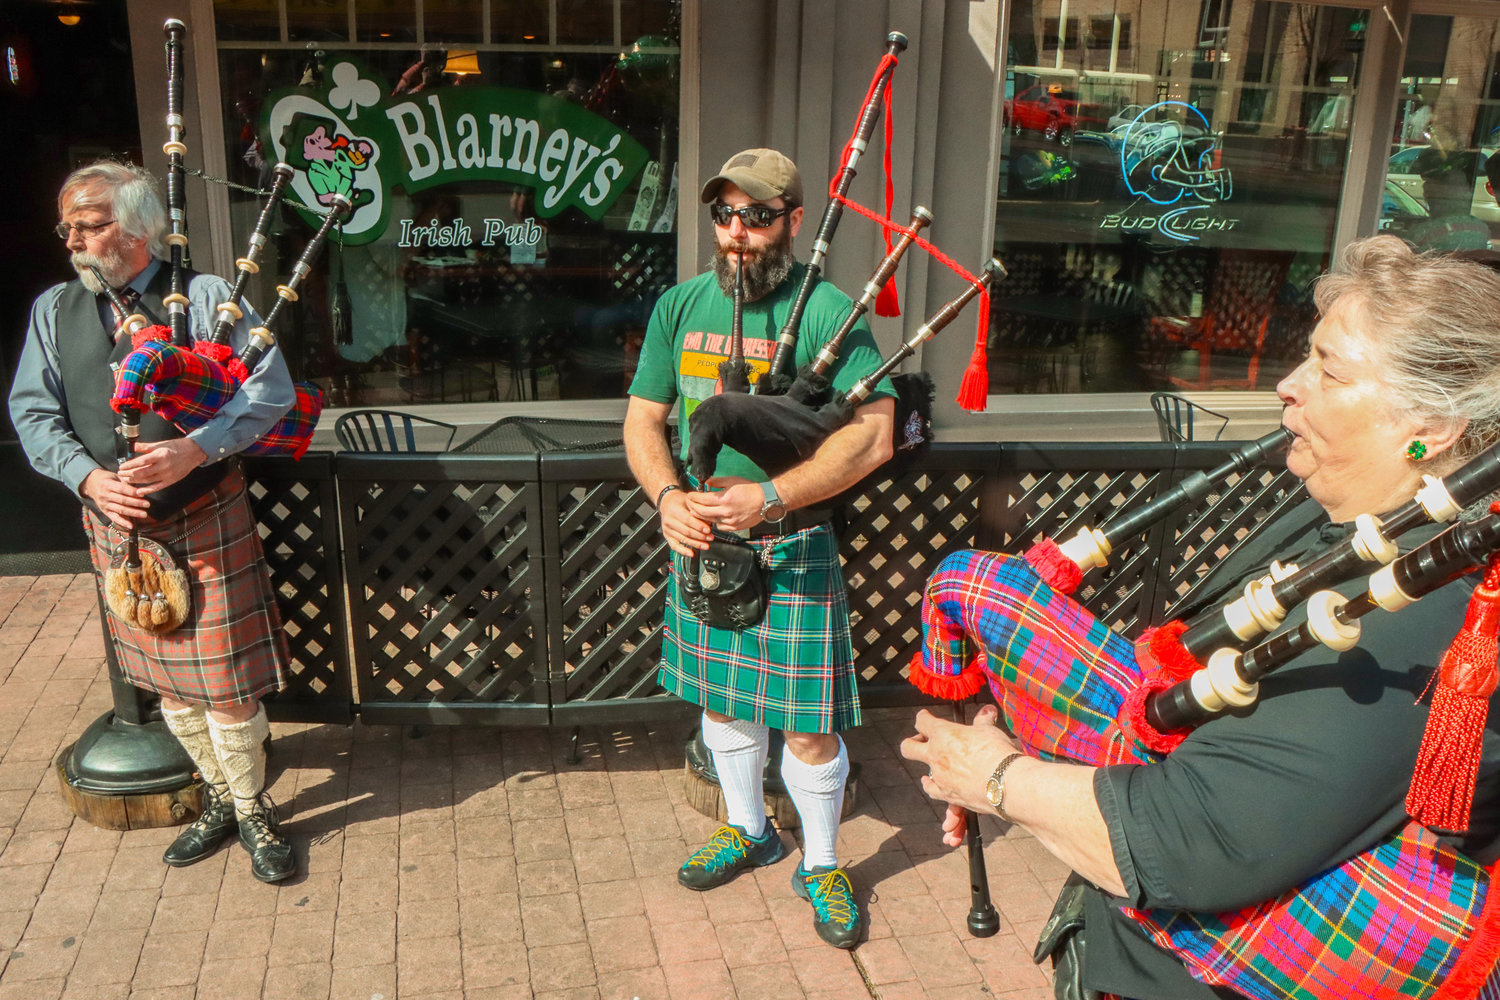 From left to right, Colin Gemmell, Aaron Amick, and Beverly York play bagpipes outside of O'Blarney's Irish Pub on St. Patrick's Day in Centralia.